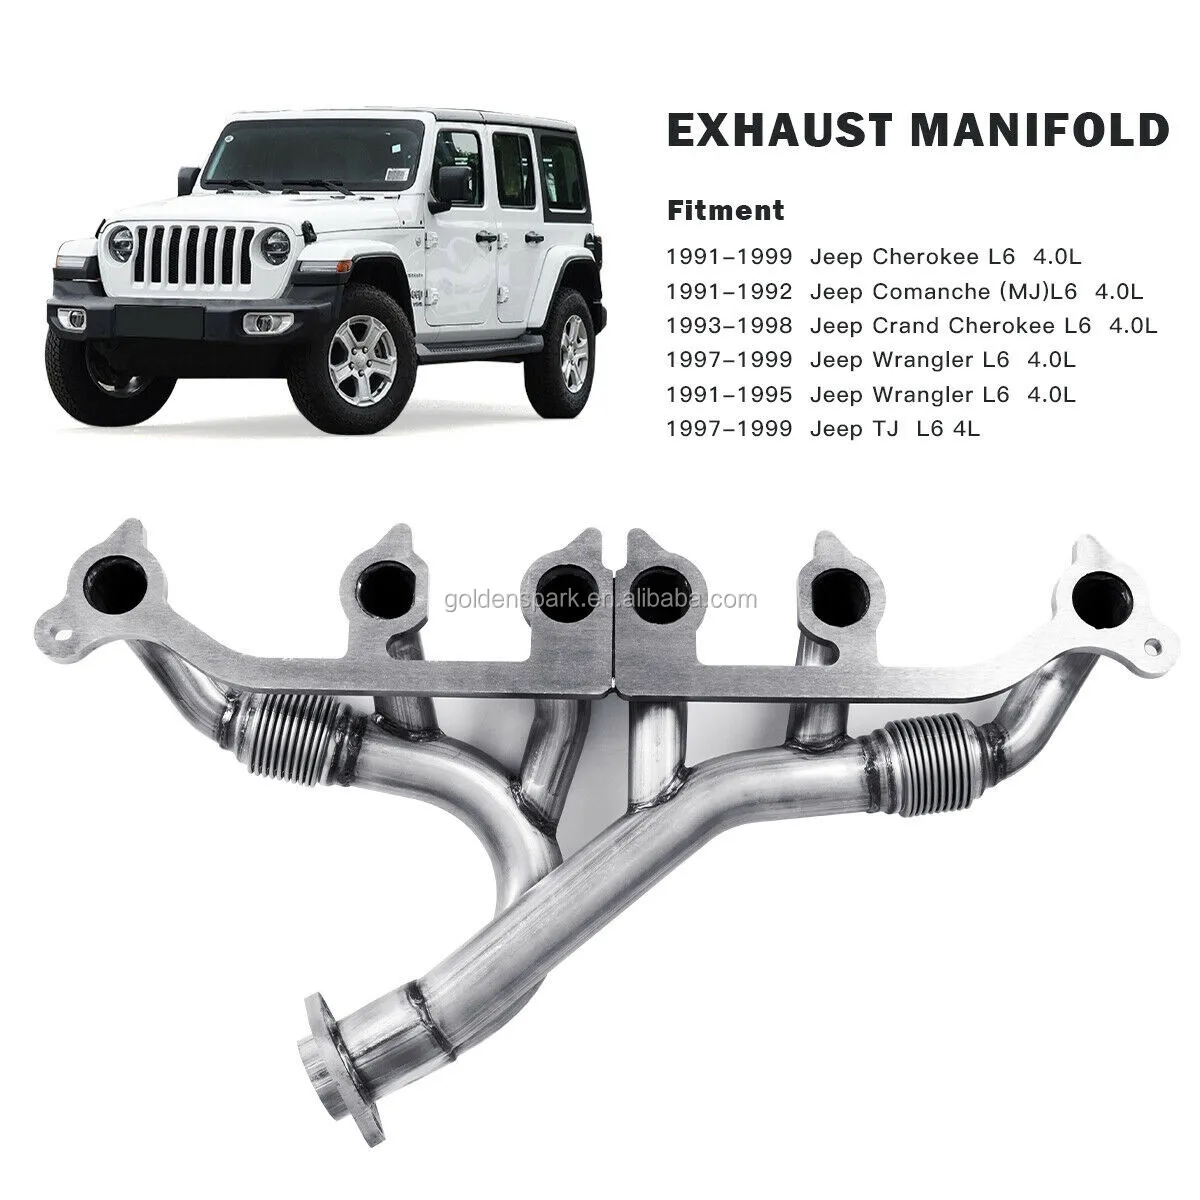 Exhaust Manifold Kits Set For Jeep Wrangler Grand Cherokee - Buy Exhaust  Manifold Kits Set,Exhaust Manifold Kits,Earring Sets For Multiple Piercings  Product on 